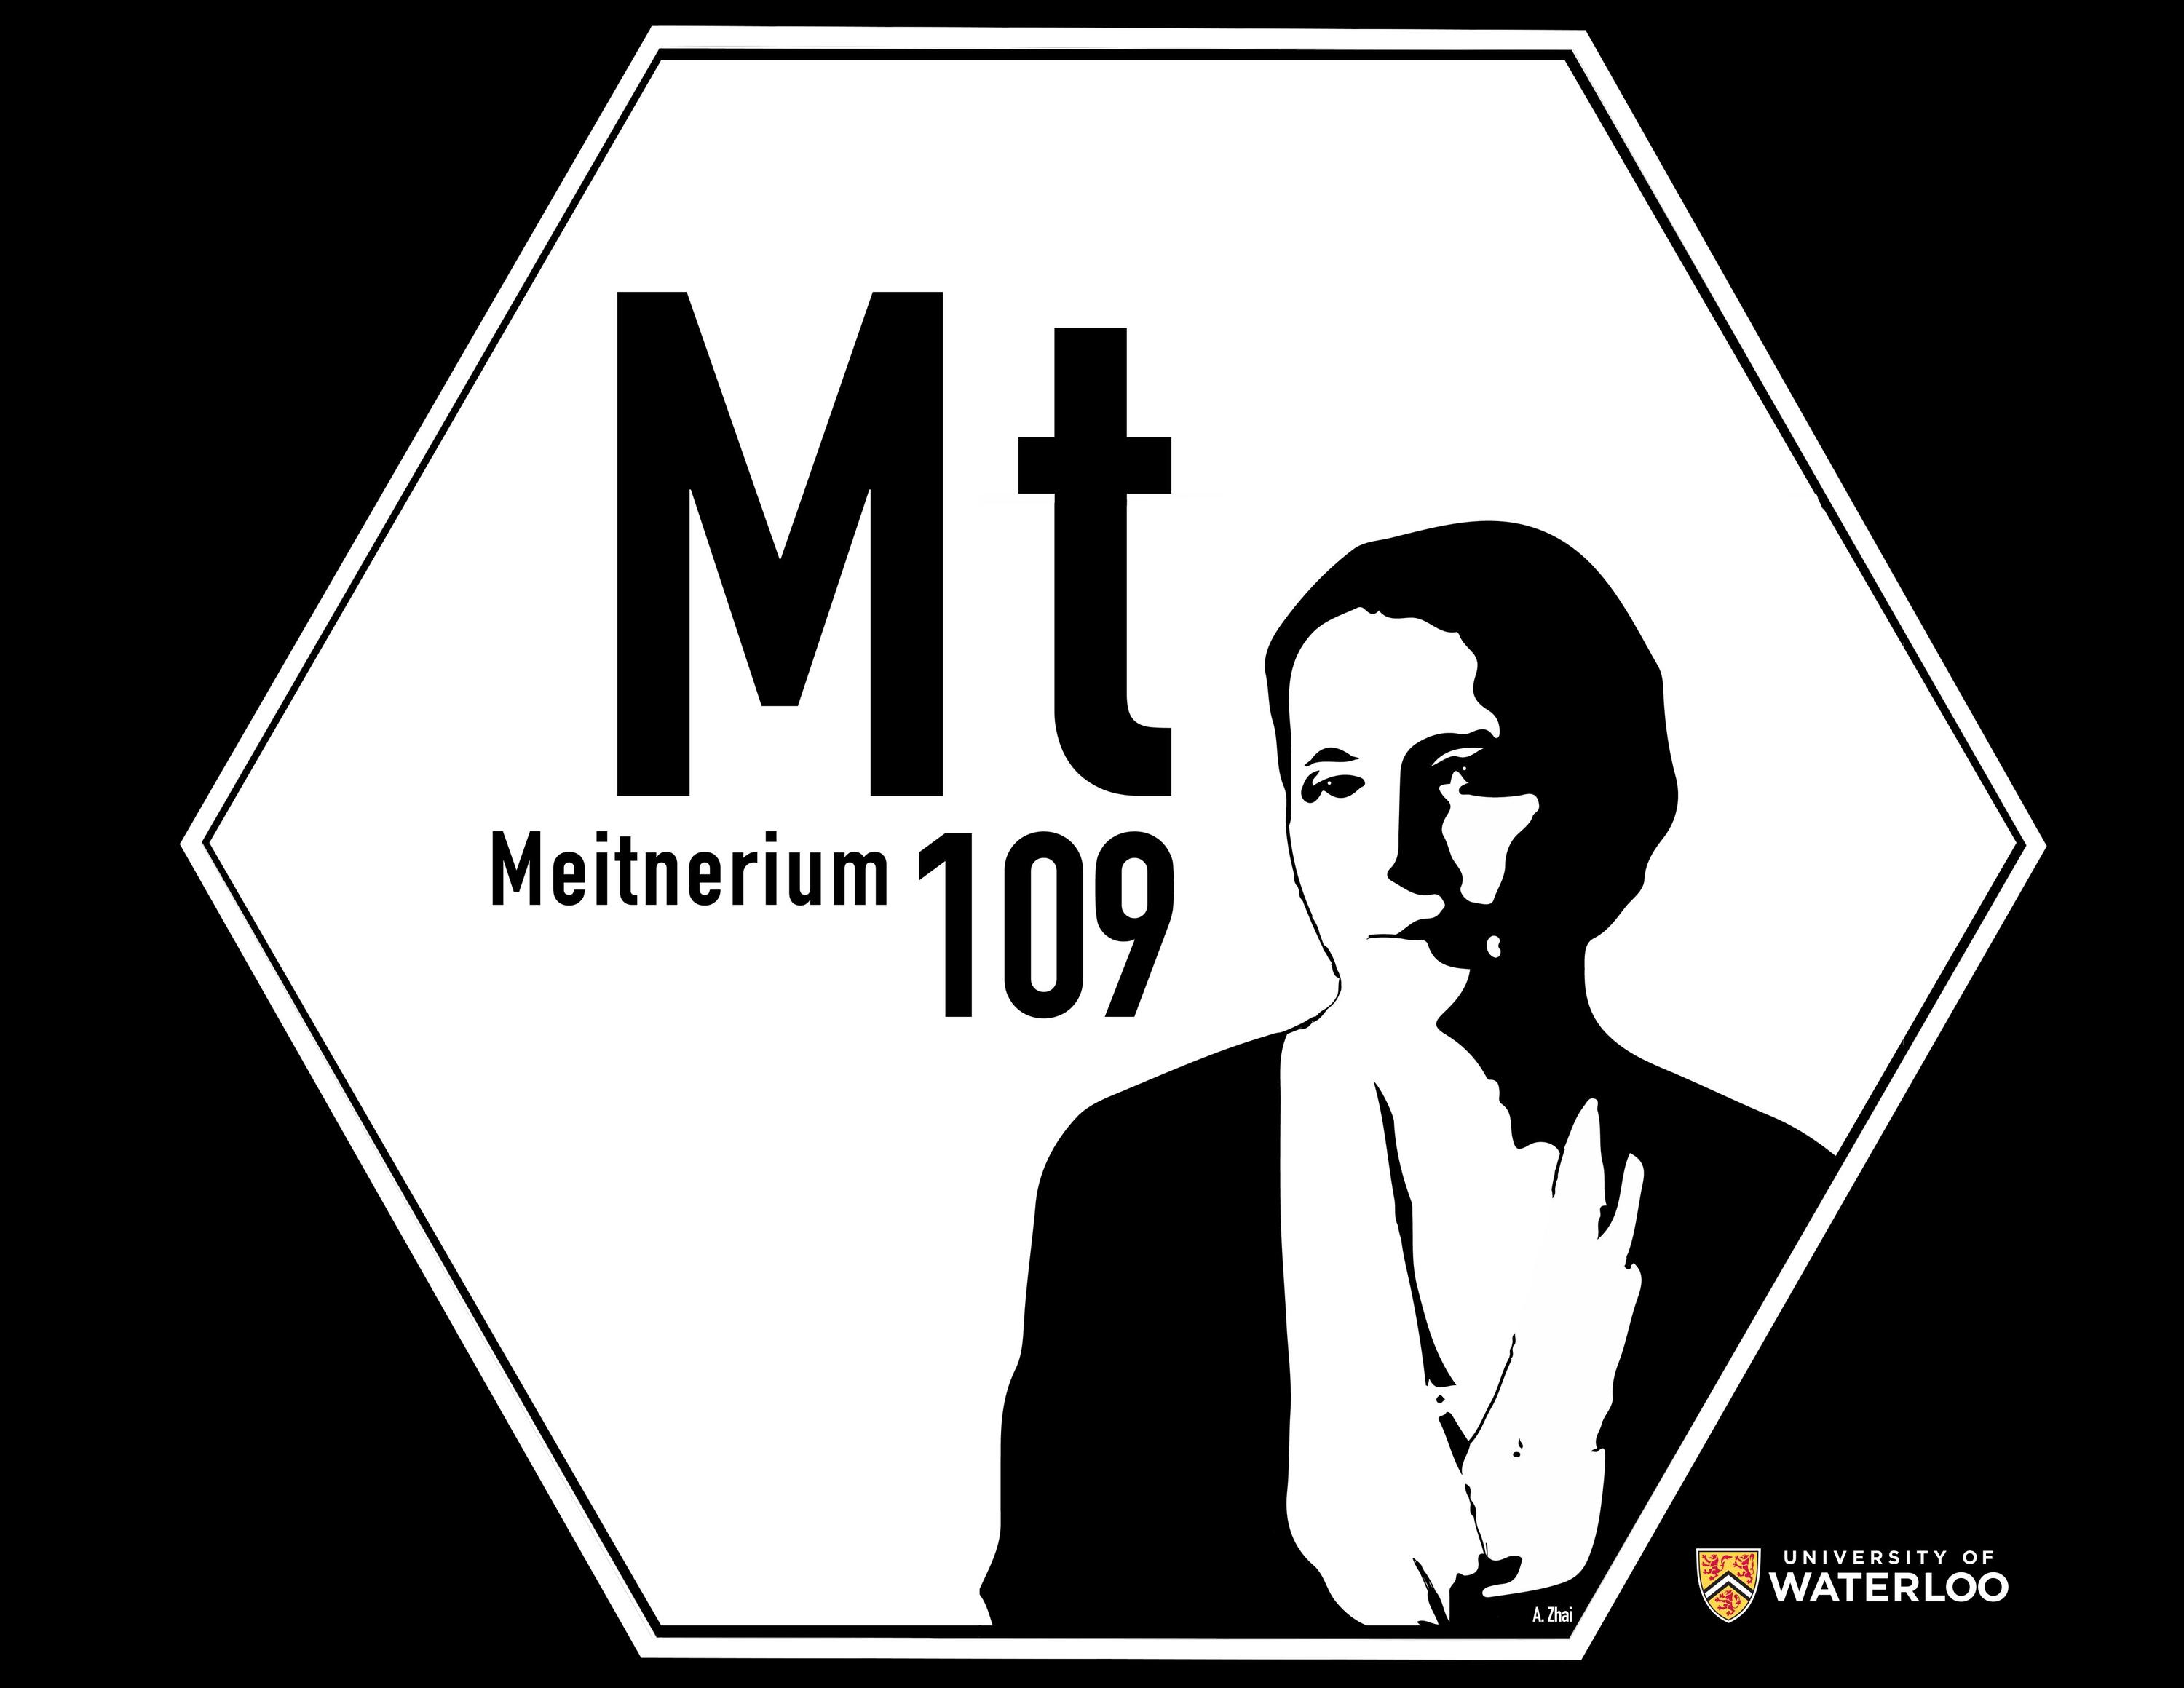 Digital composite on white background. Centre is a black-and-white pop art photograph of Lise Meitner. Upper left is the chemical symbol “Mt” along with “Meitnerium” and atomic number “109”.